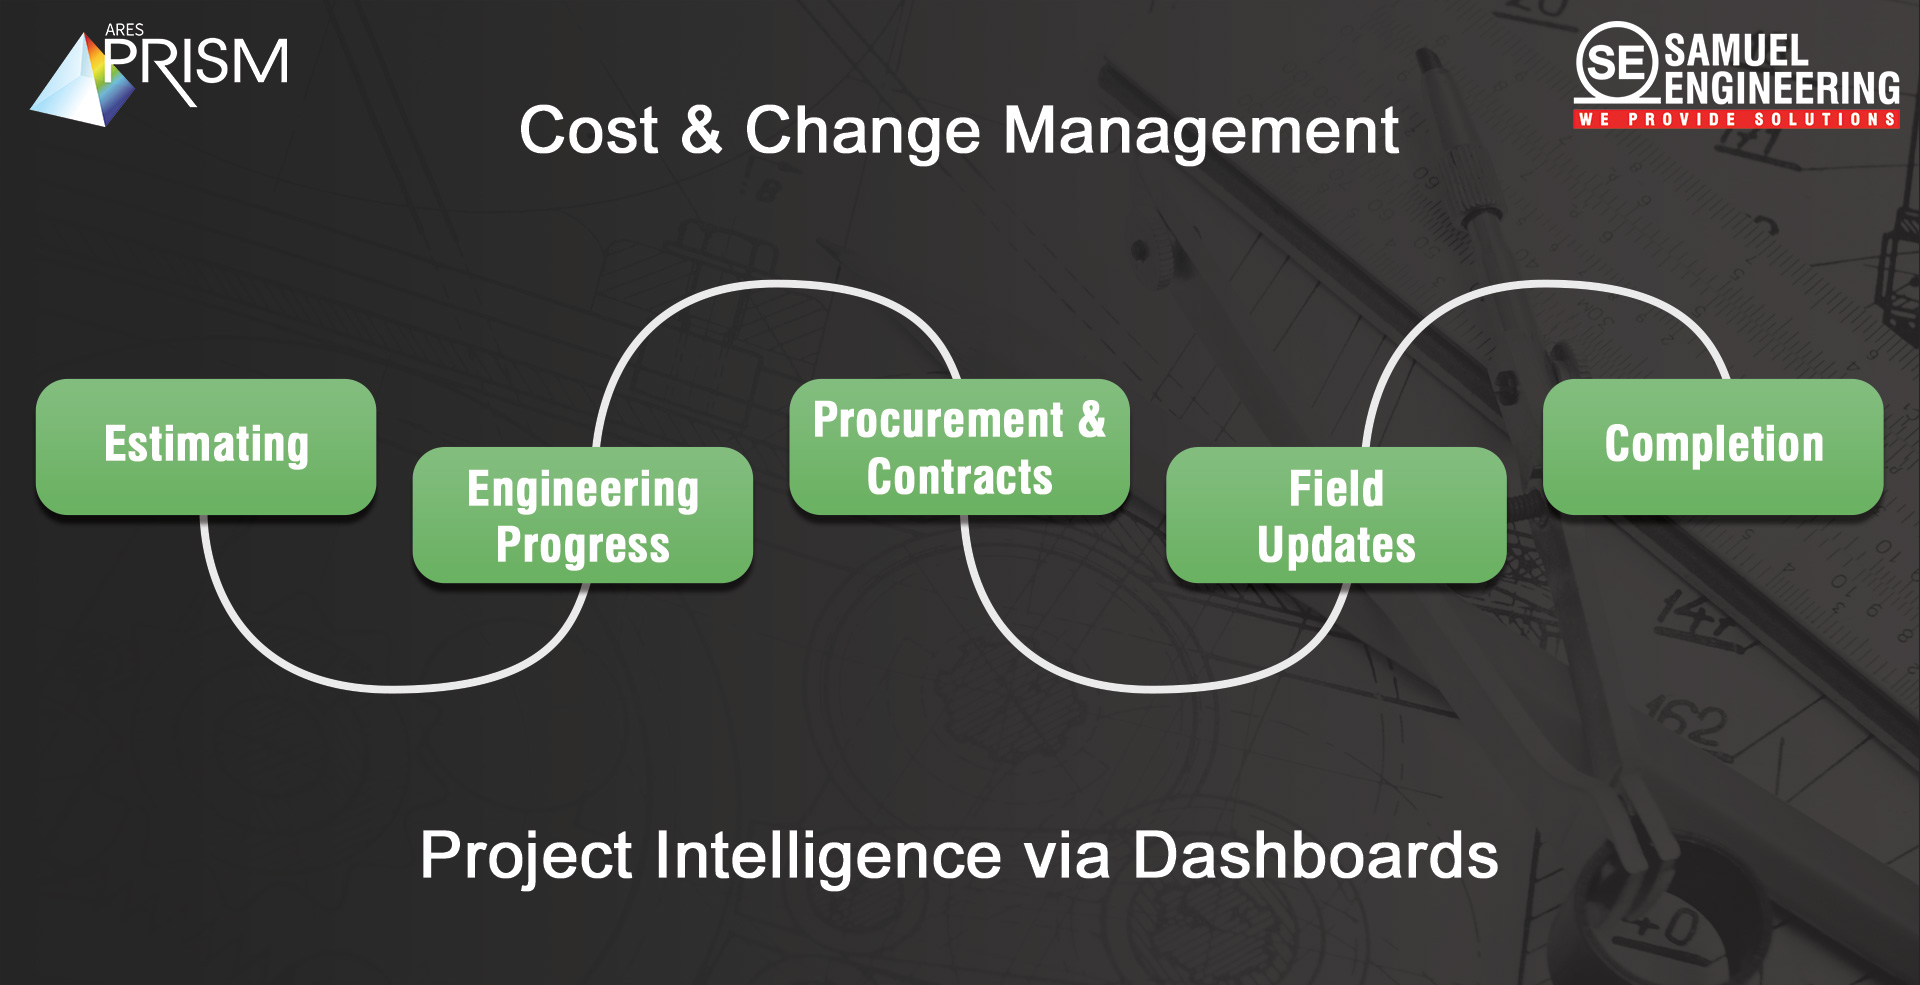 Ares Prism Samuel Engineering Project Controls Cost Management Project Intelligence